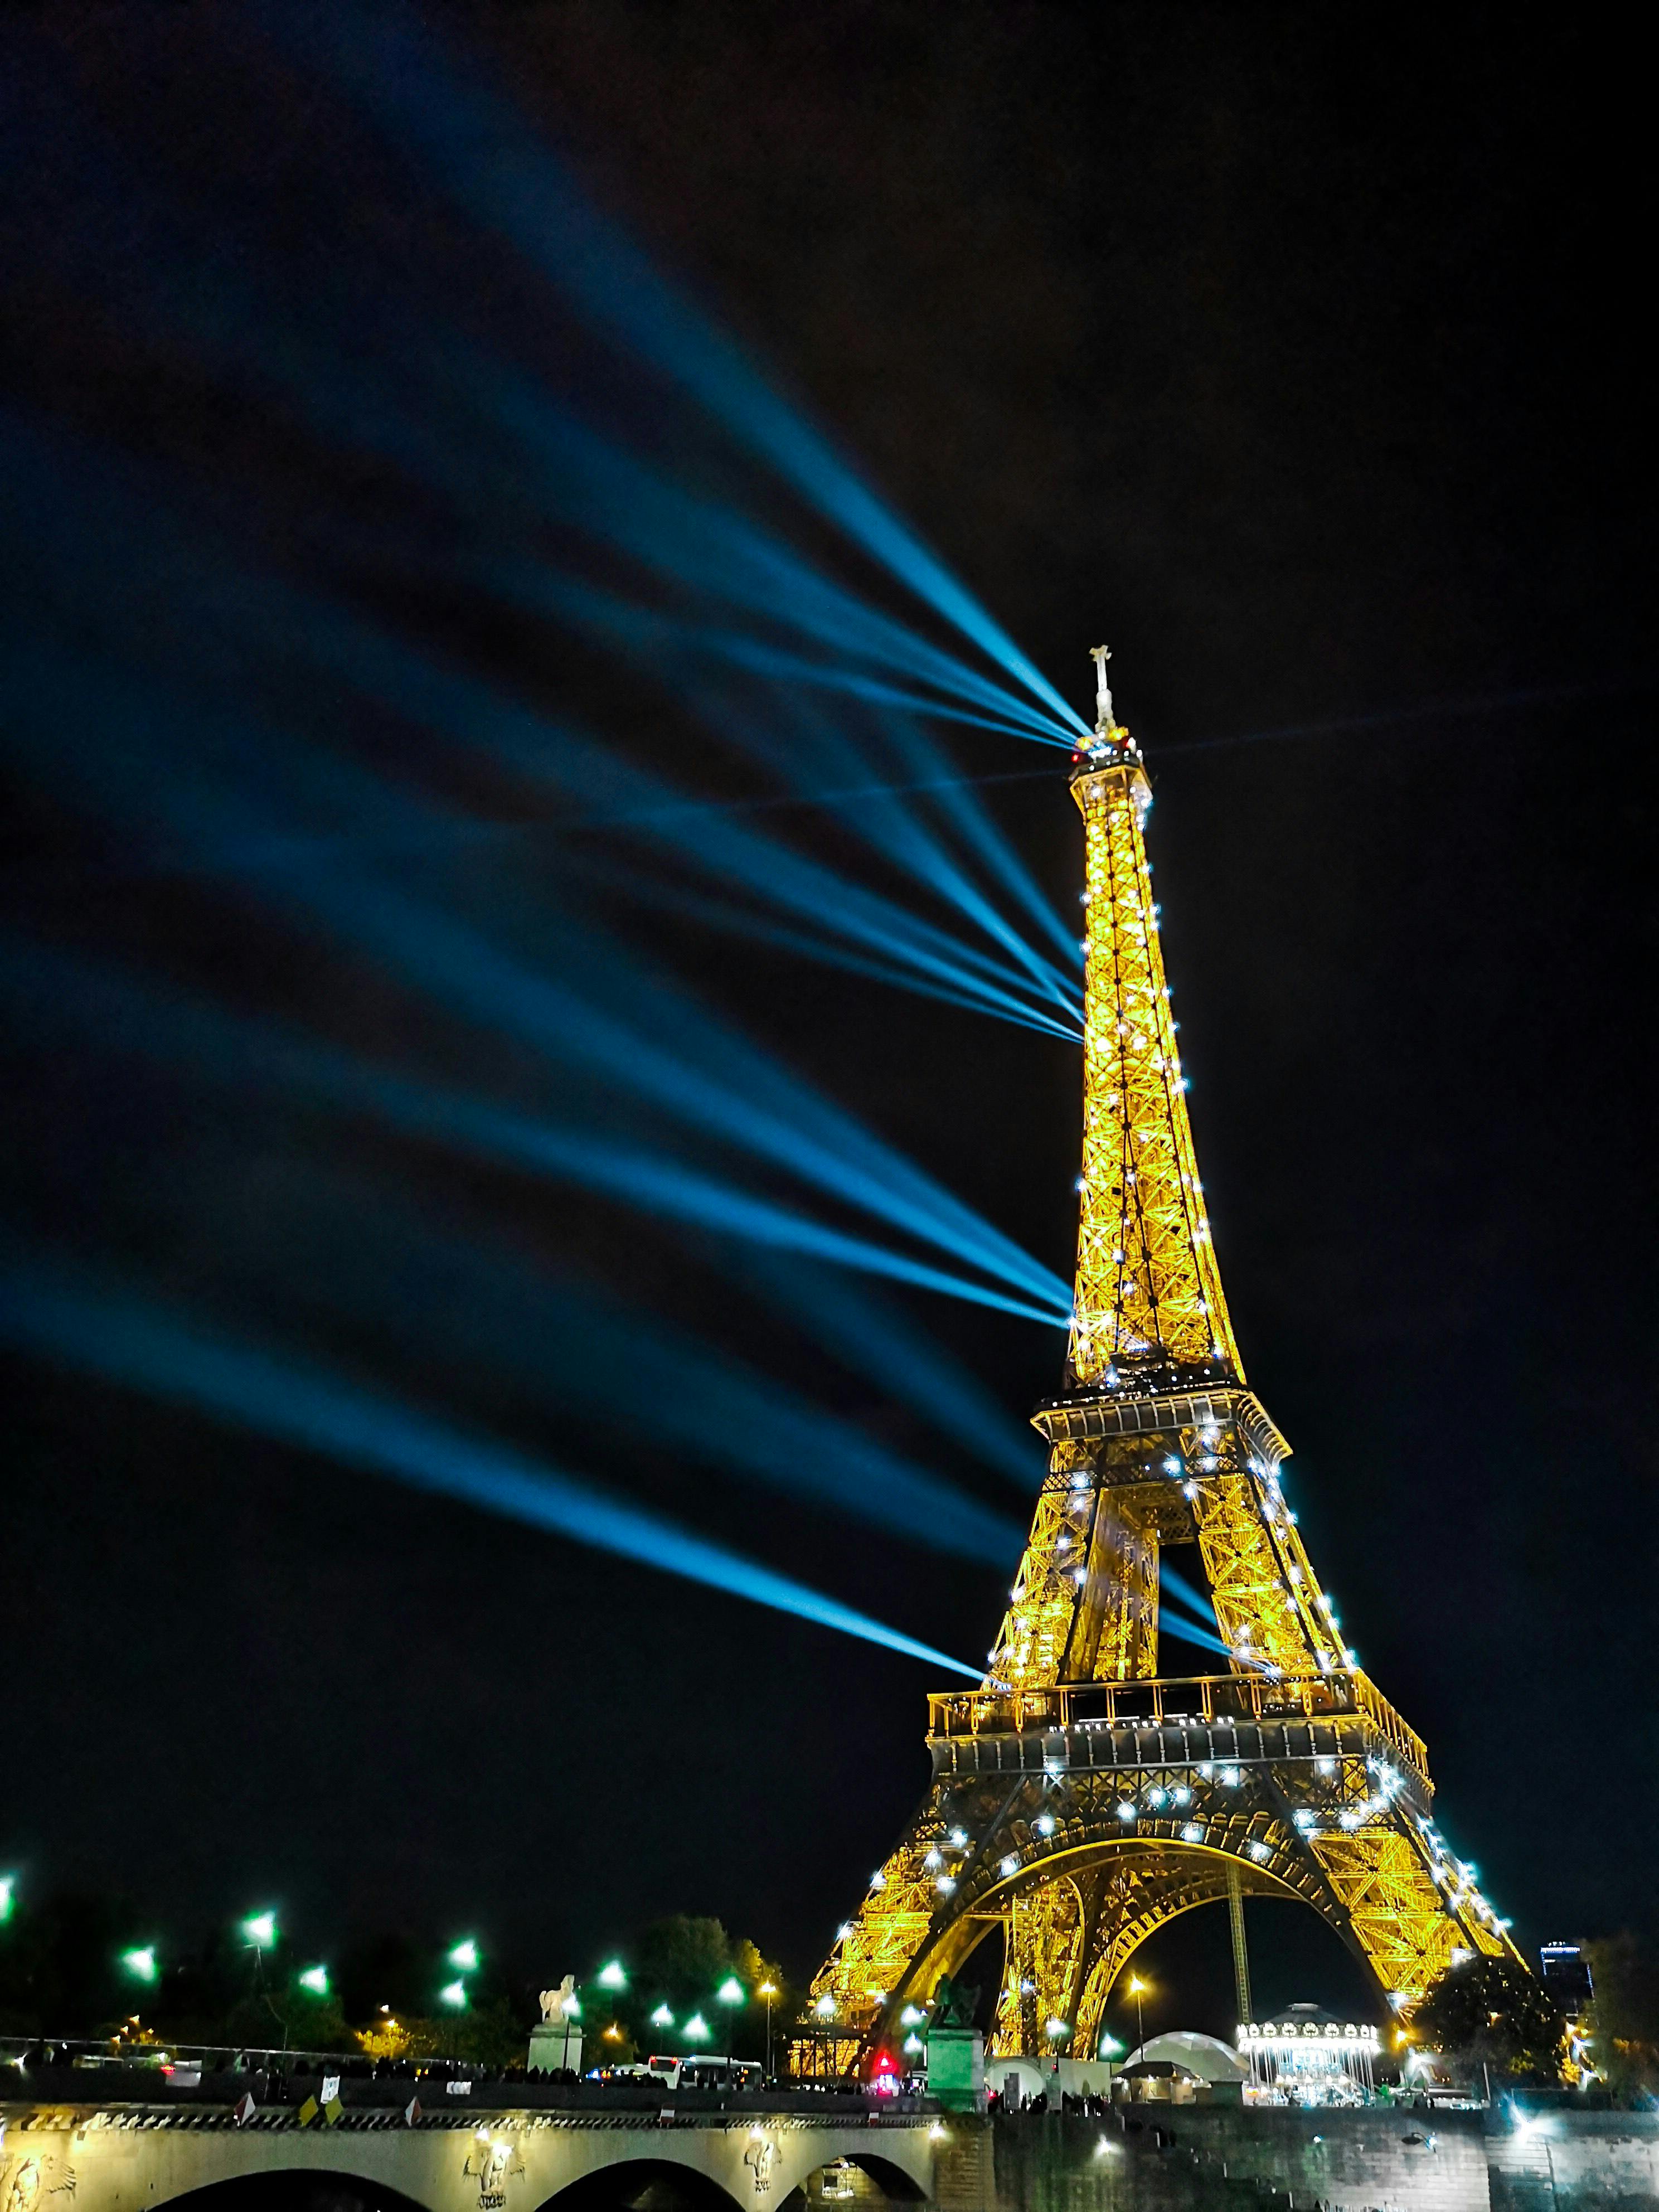 Illuminated Eiffel Tower with sparkling lights at night · Free Stock Photo